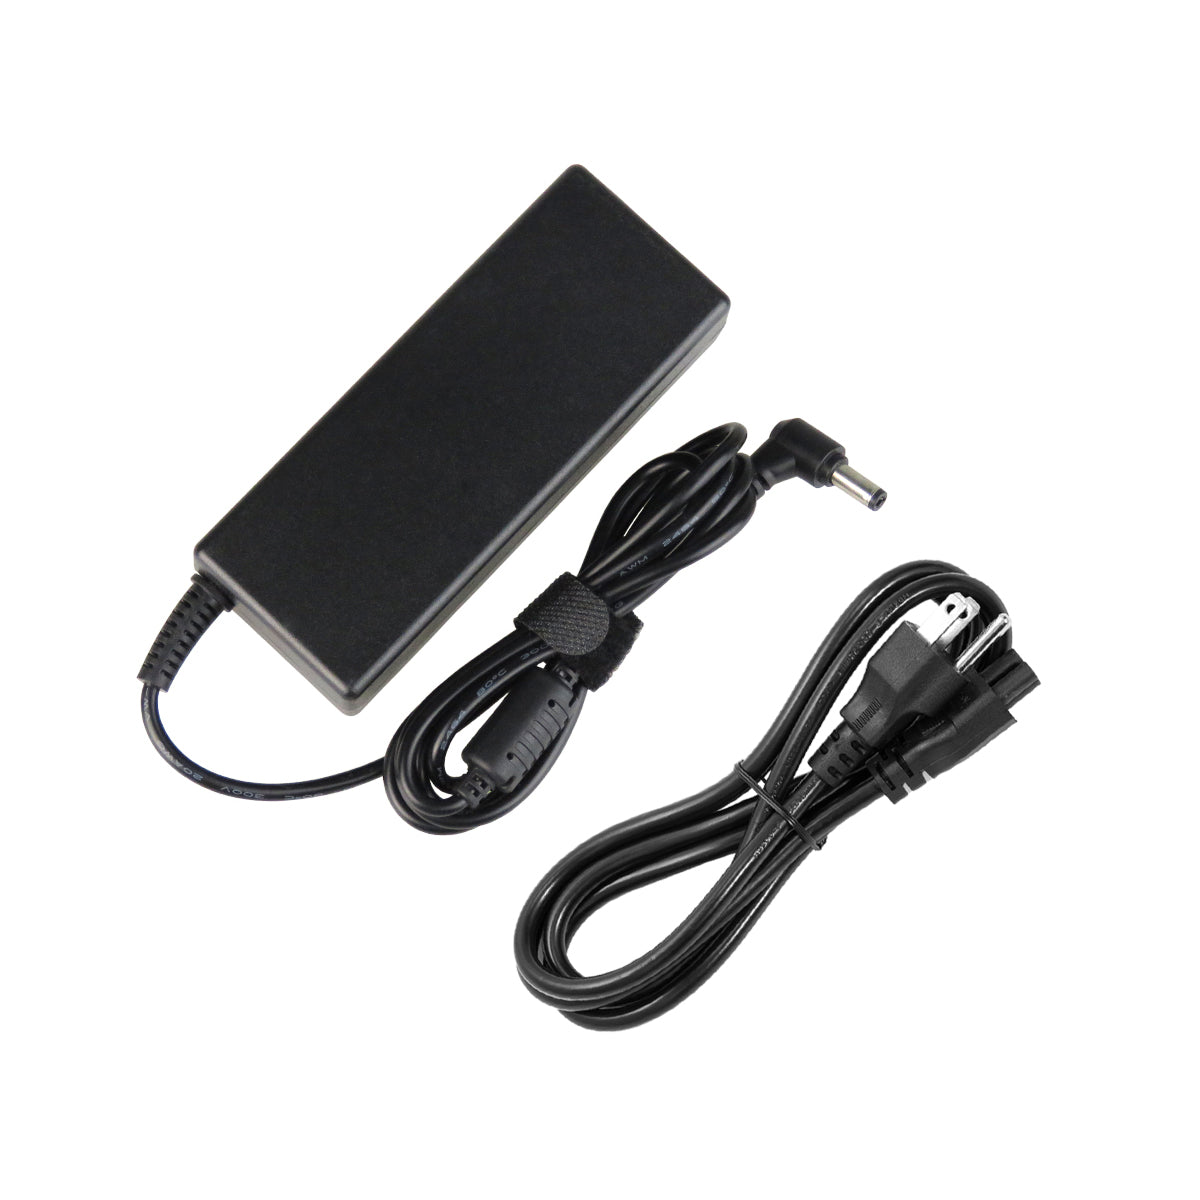 AC Adapter Charger for ASUS F7400 Notebook.